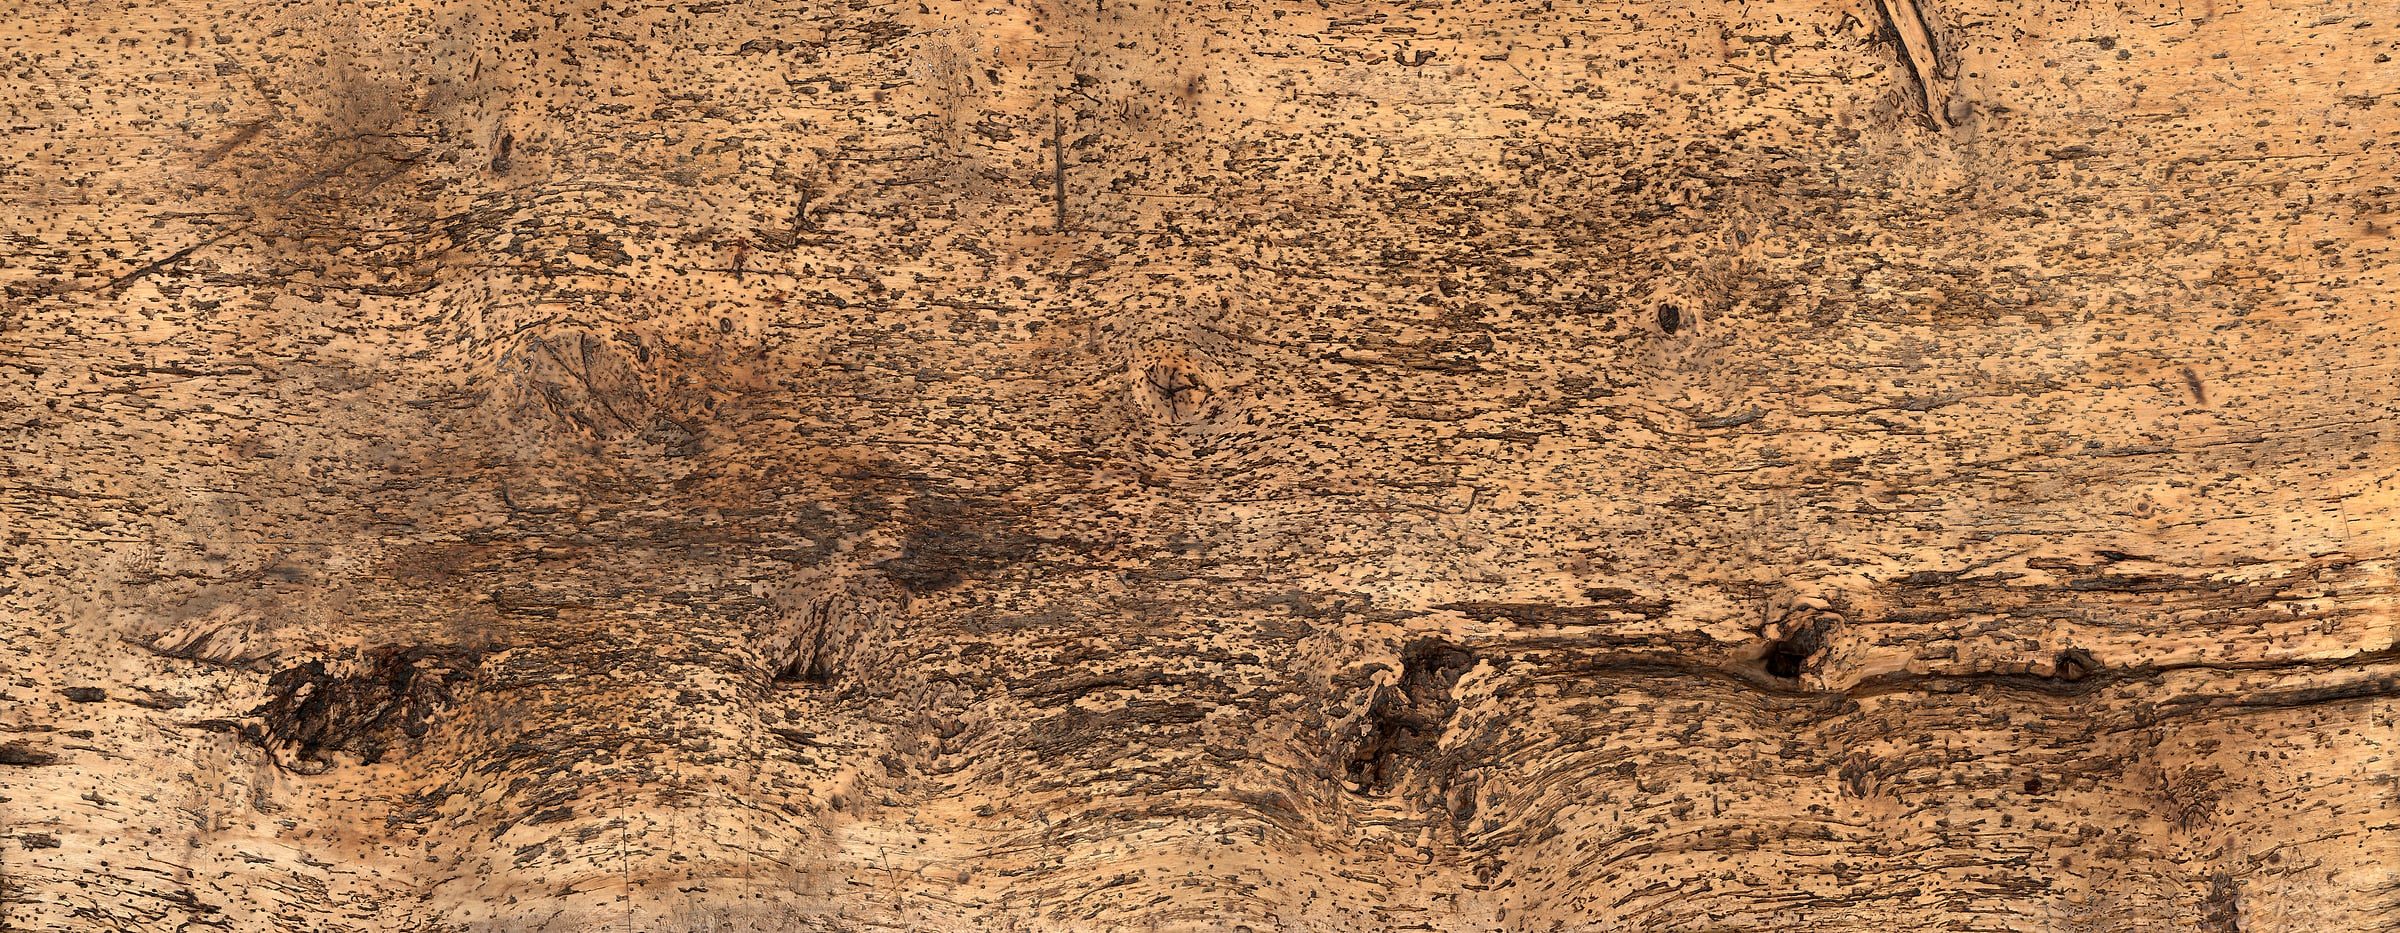 2,311 megapixels! An ultra-high-resolution texture photo file of an old pitted wood plank; gigapixel photograph created by David Lineton.